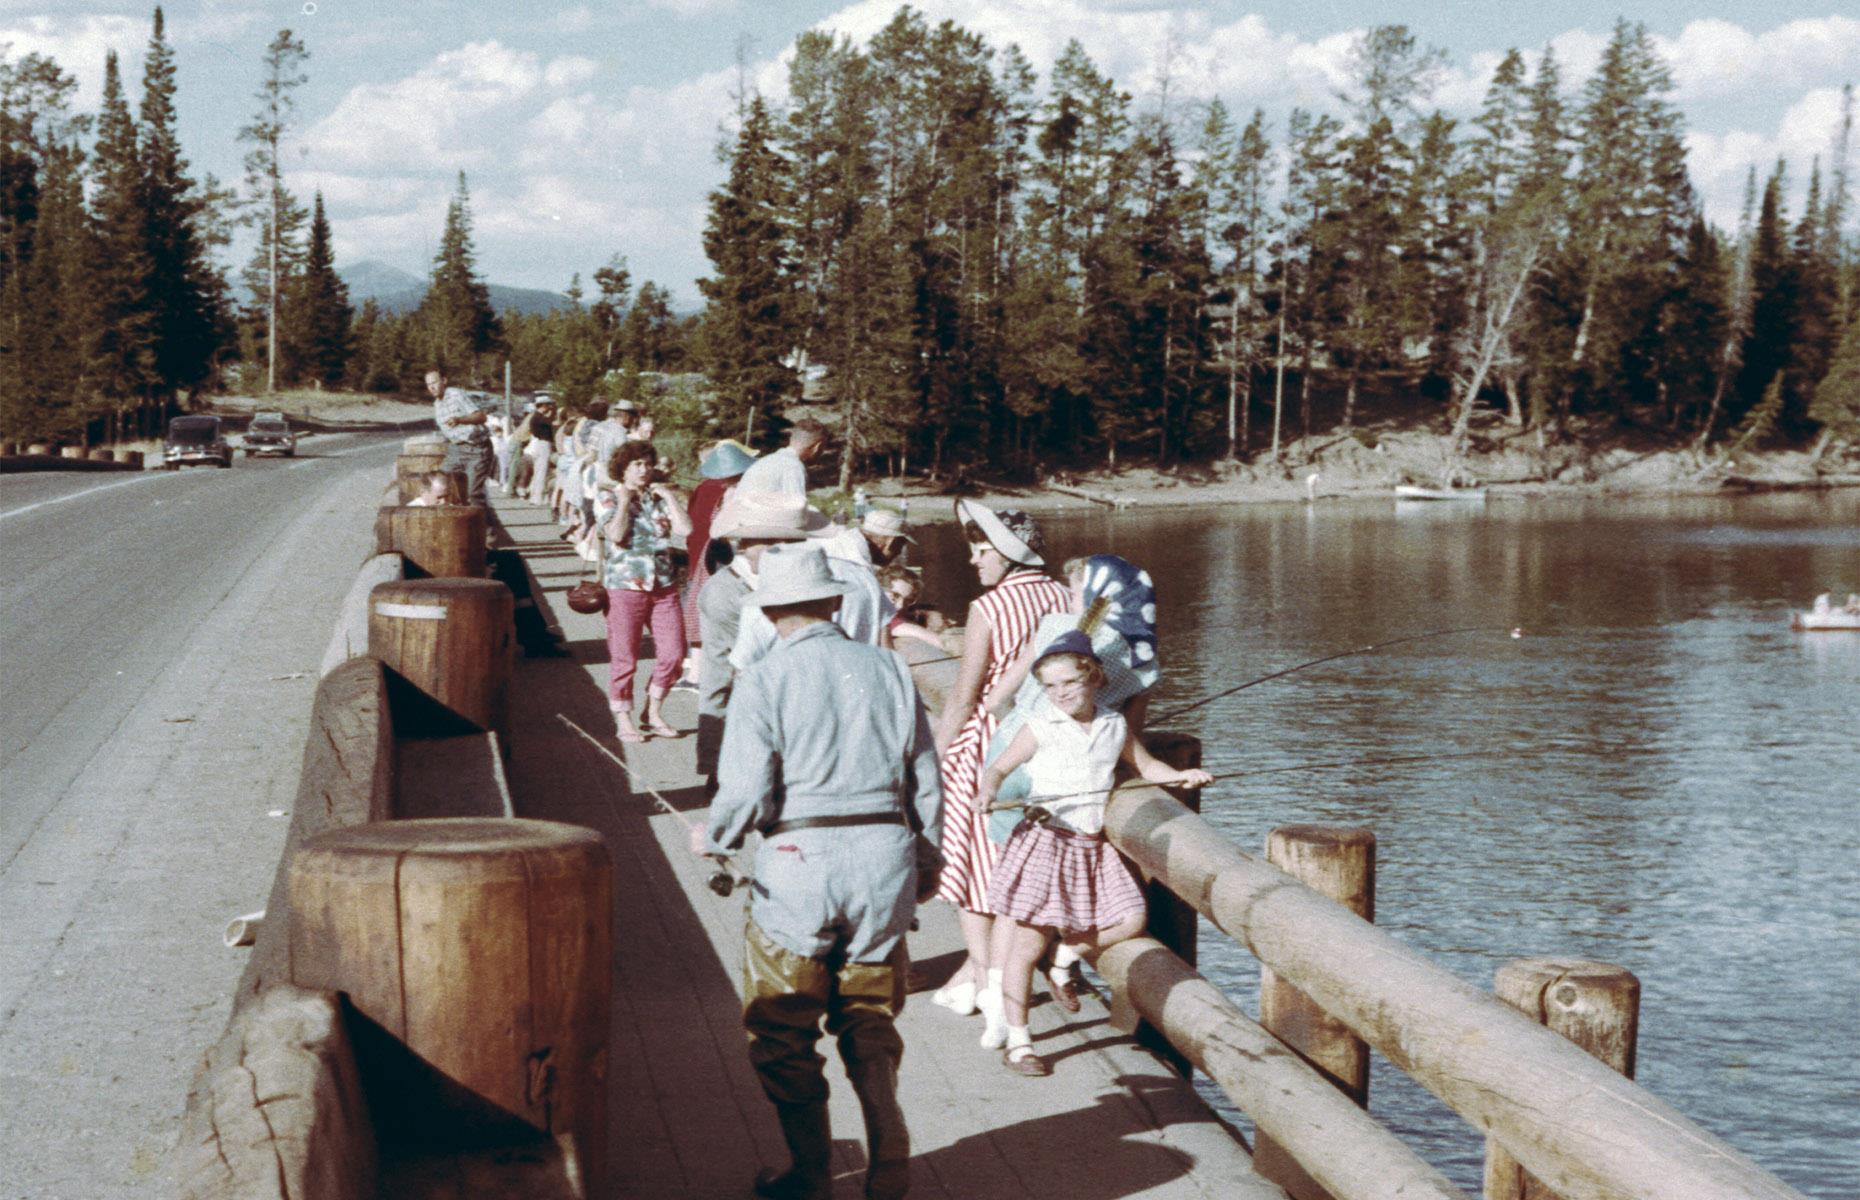 Yellowstone's original Fishing Bridge was built as early as 1902, though the current structure dates to 1937. During the first half of the 20th century, it was the park's star spot for trout fishing – however, dwindling populations meant that fishing was banned here in 1973. Visitors are pictured here enjoying the bridge in 1975 and its sweeping views over Yellowstone Lake still draw the crowds today.